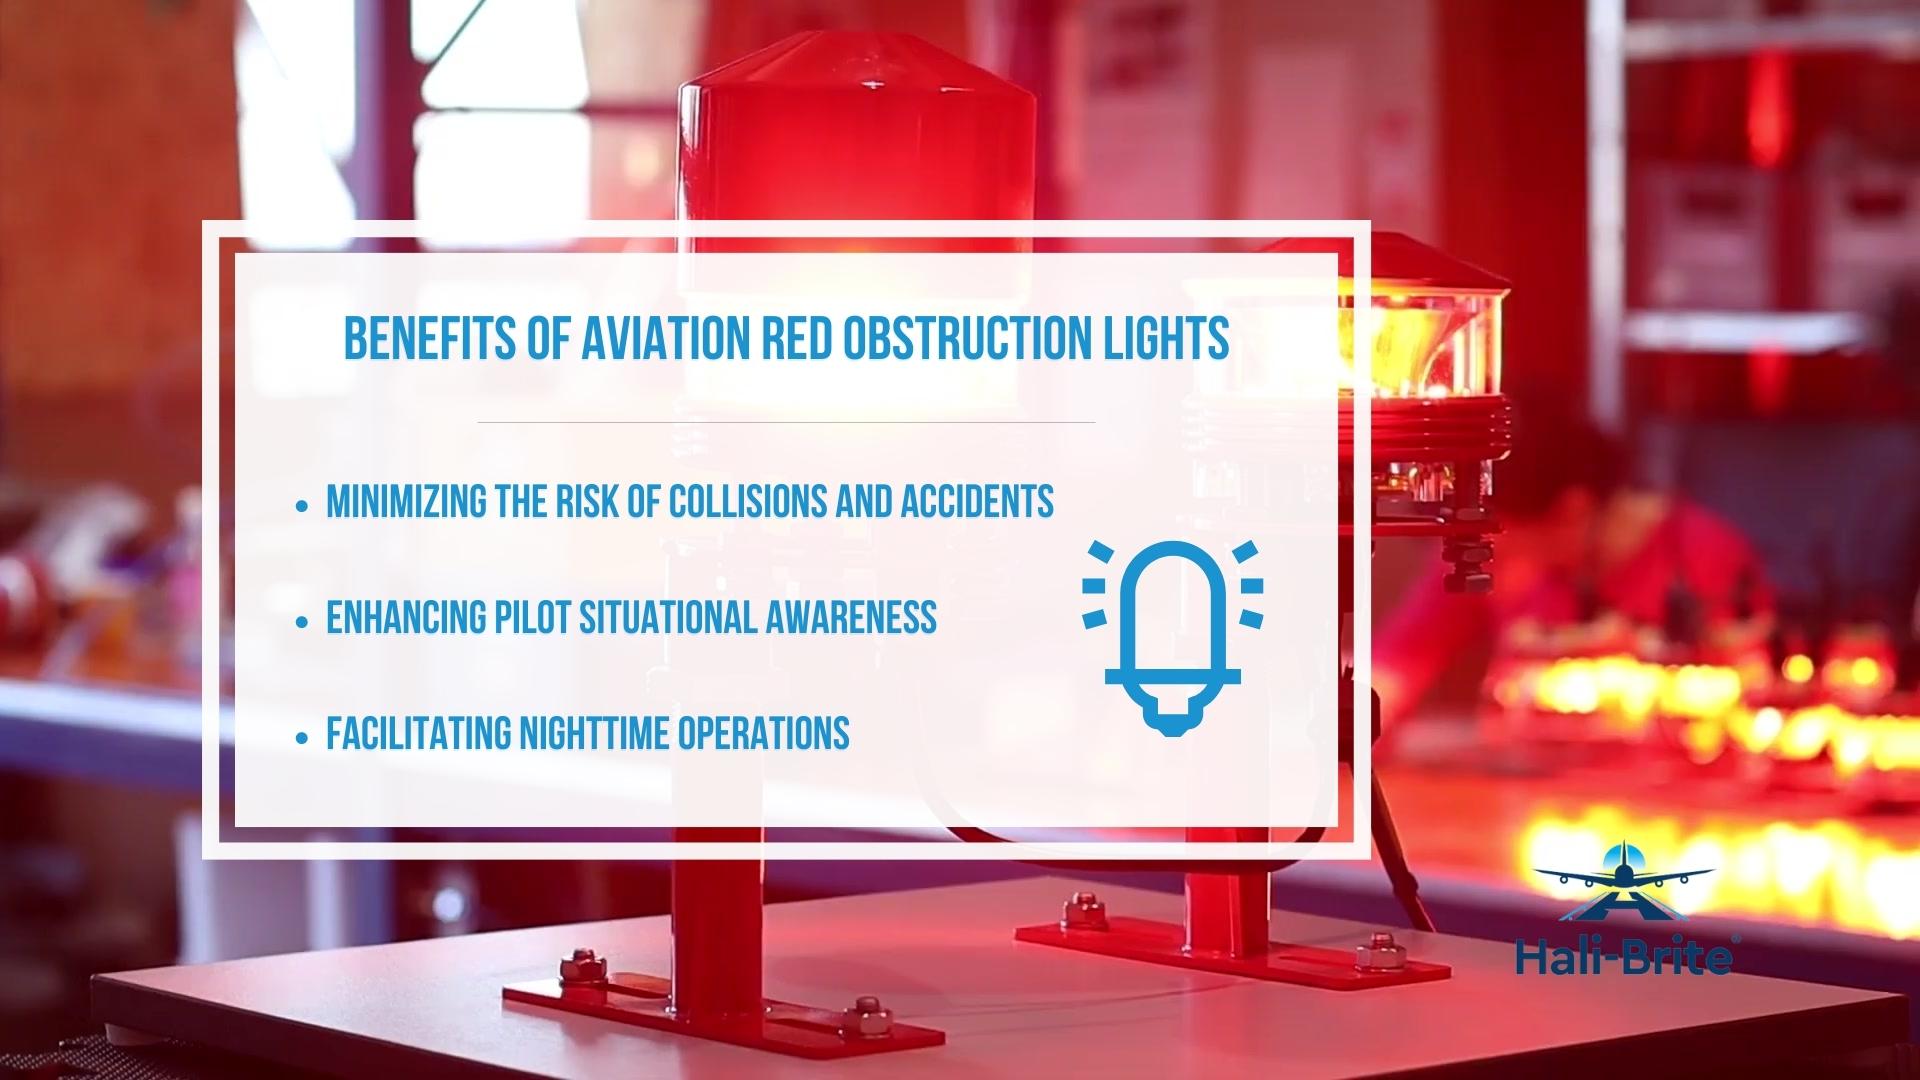 Infographic image of benefits of aviation red obstruction lights